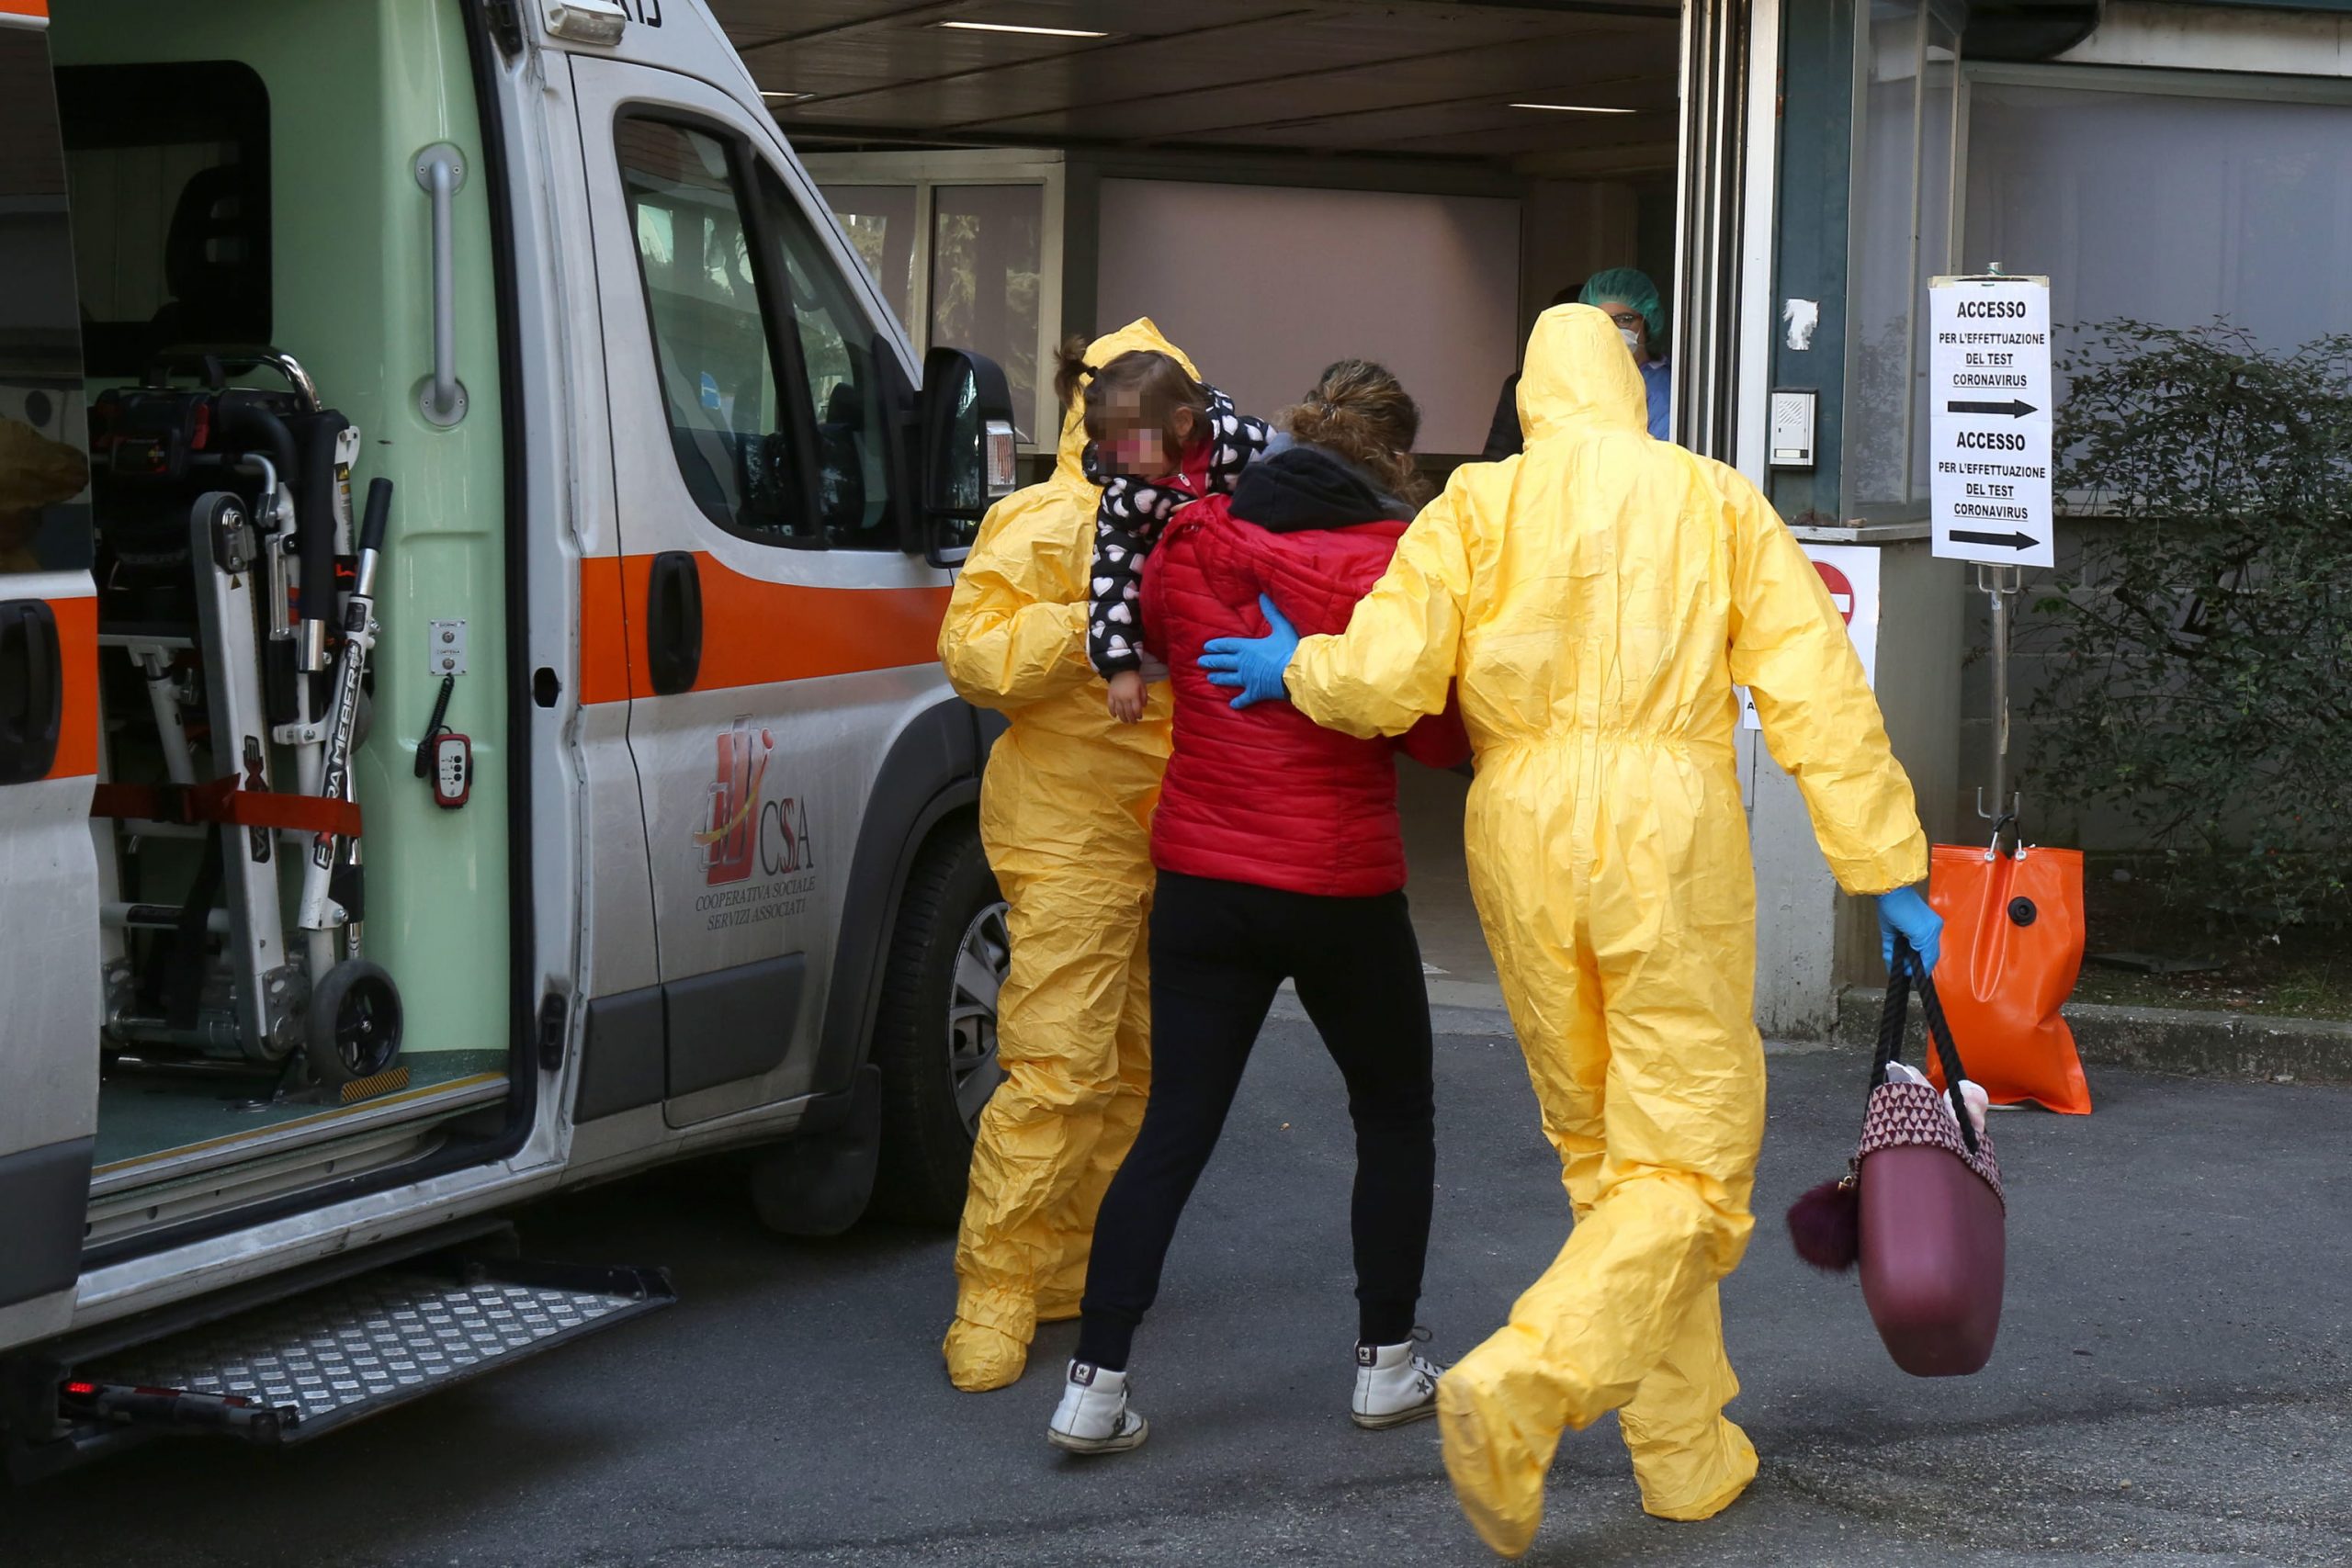 epa08252377 Health workers wearing full-body suits escort a person with a child in her arms (C) out of an ambulance, outside the Padua hospital, northern Italy, 27 February 2020. The number of people infected with the novel coronavirus (Covid-19) disease who have died in Italy has risen to 14, as the number of infected cases reached 528, Head of the Italian Civil Protection Borrelli said on the day.  EPA/NICOLA FOSSELLA -- ATTENTION EDITORS: IMAGE PIXELATED AT SOURCE IN ACCORDANCE WITH ITALIAN LAW